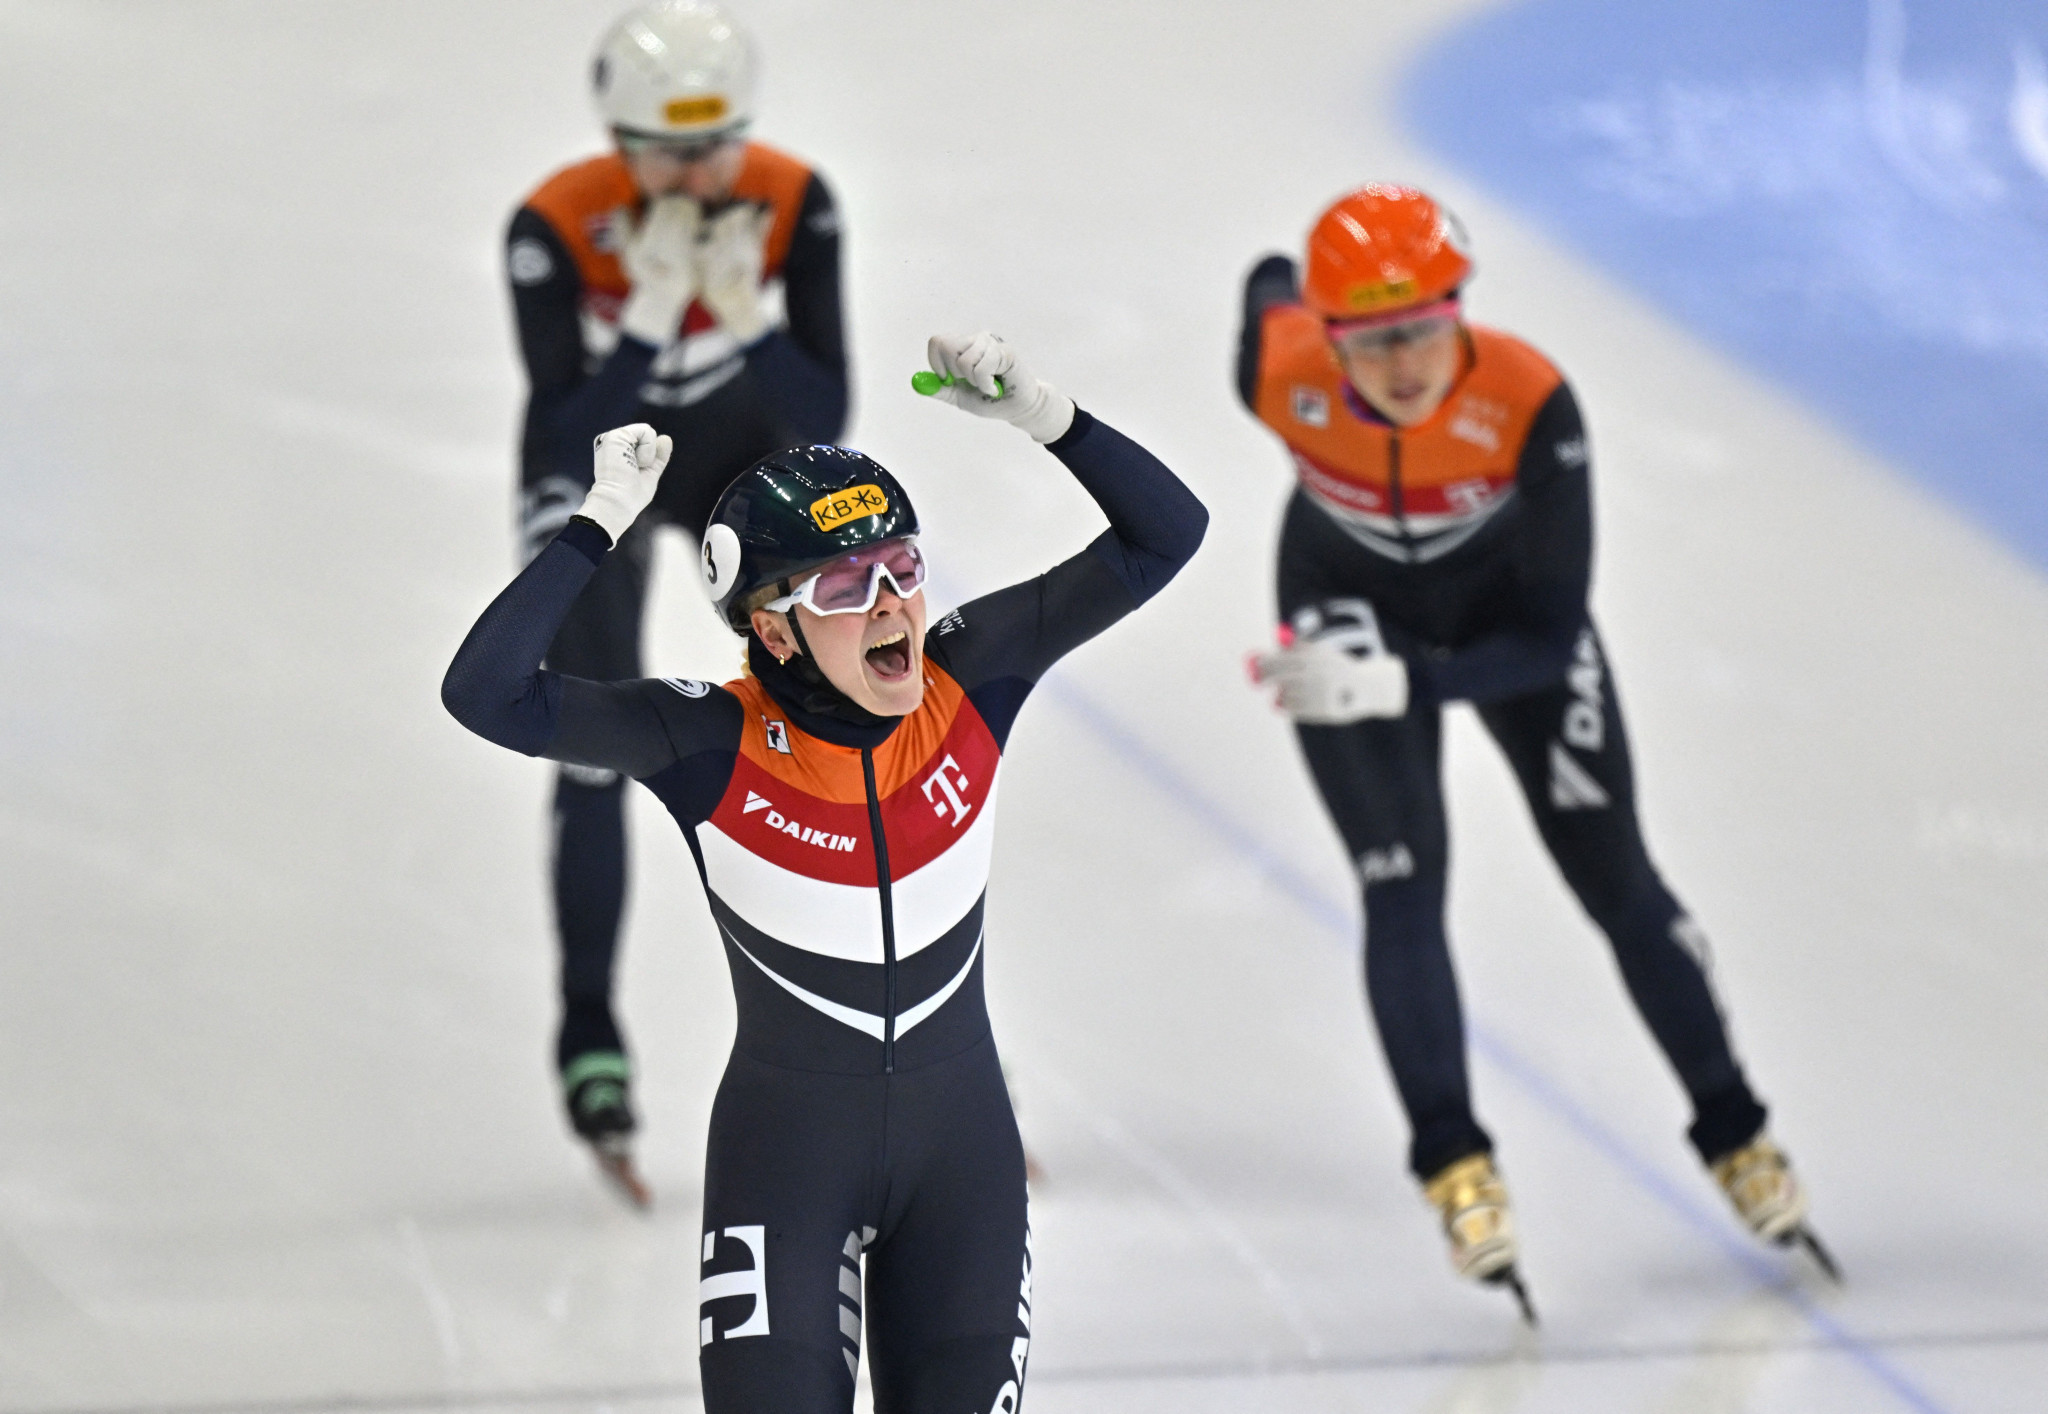 Velzeboer defends title in Dutch double at ISU World Short Track Championships